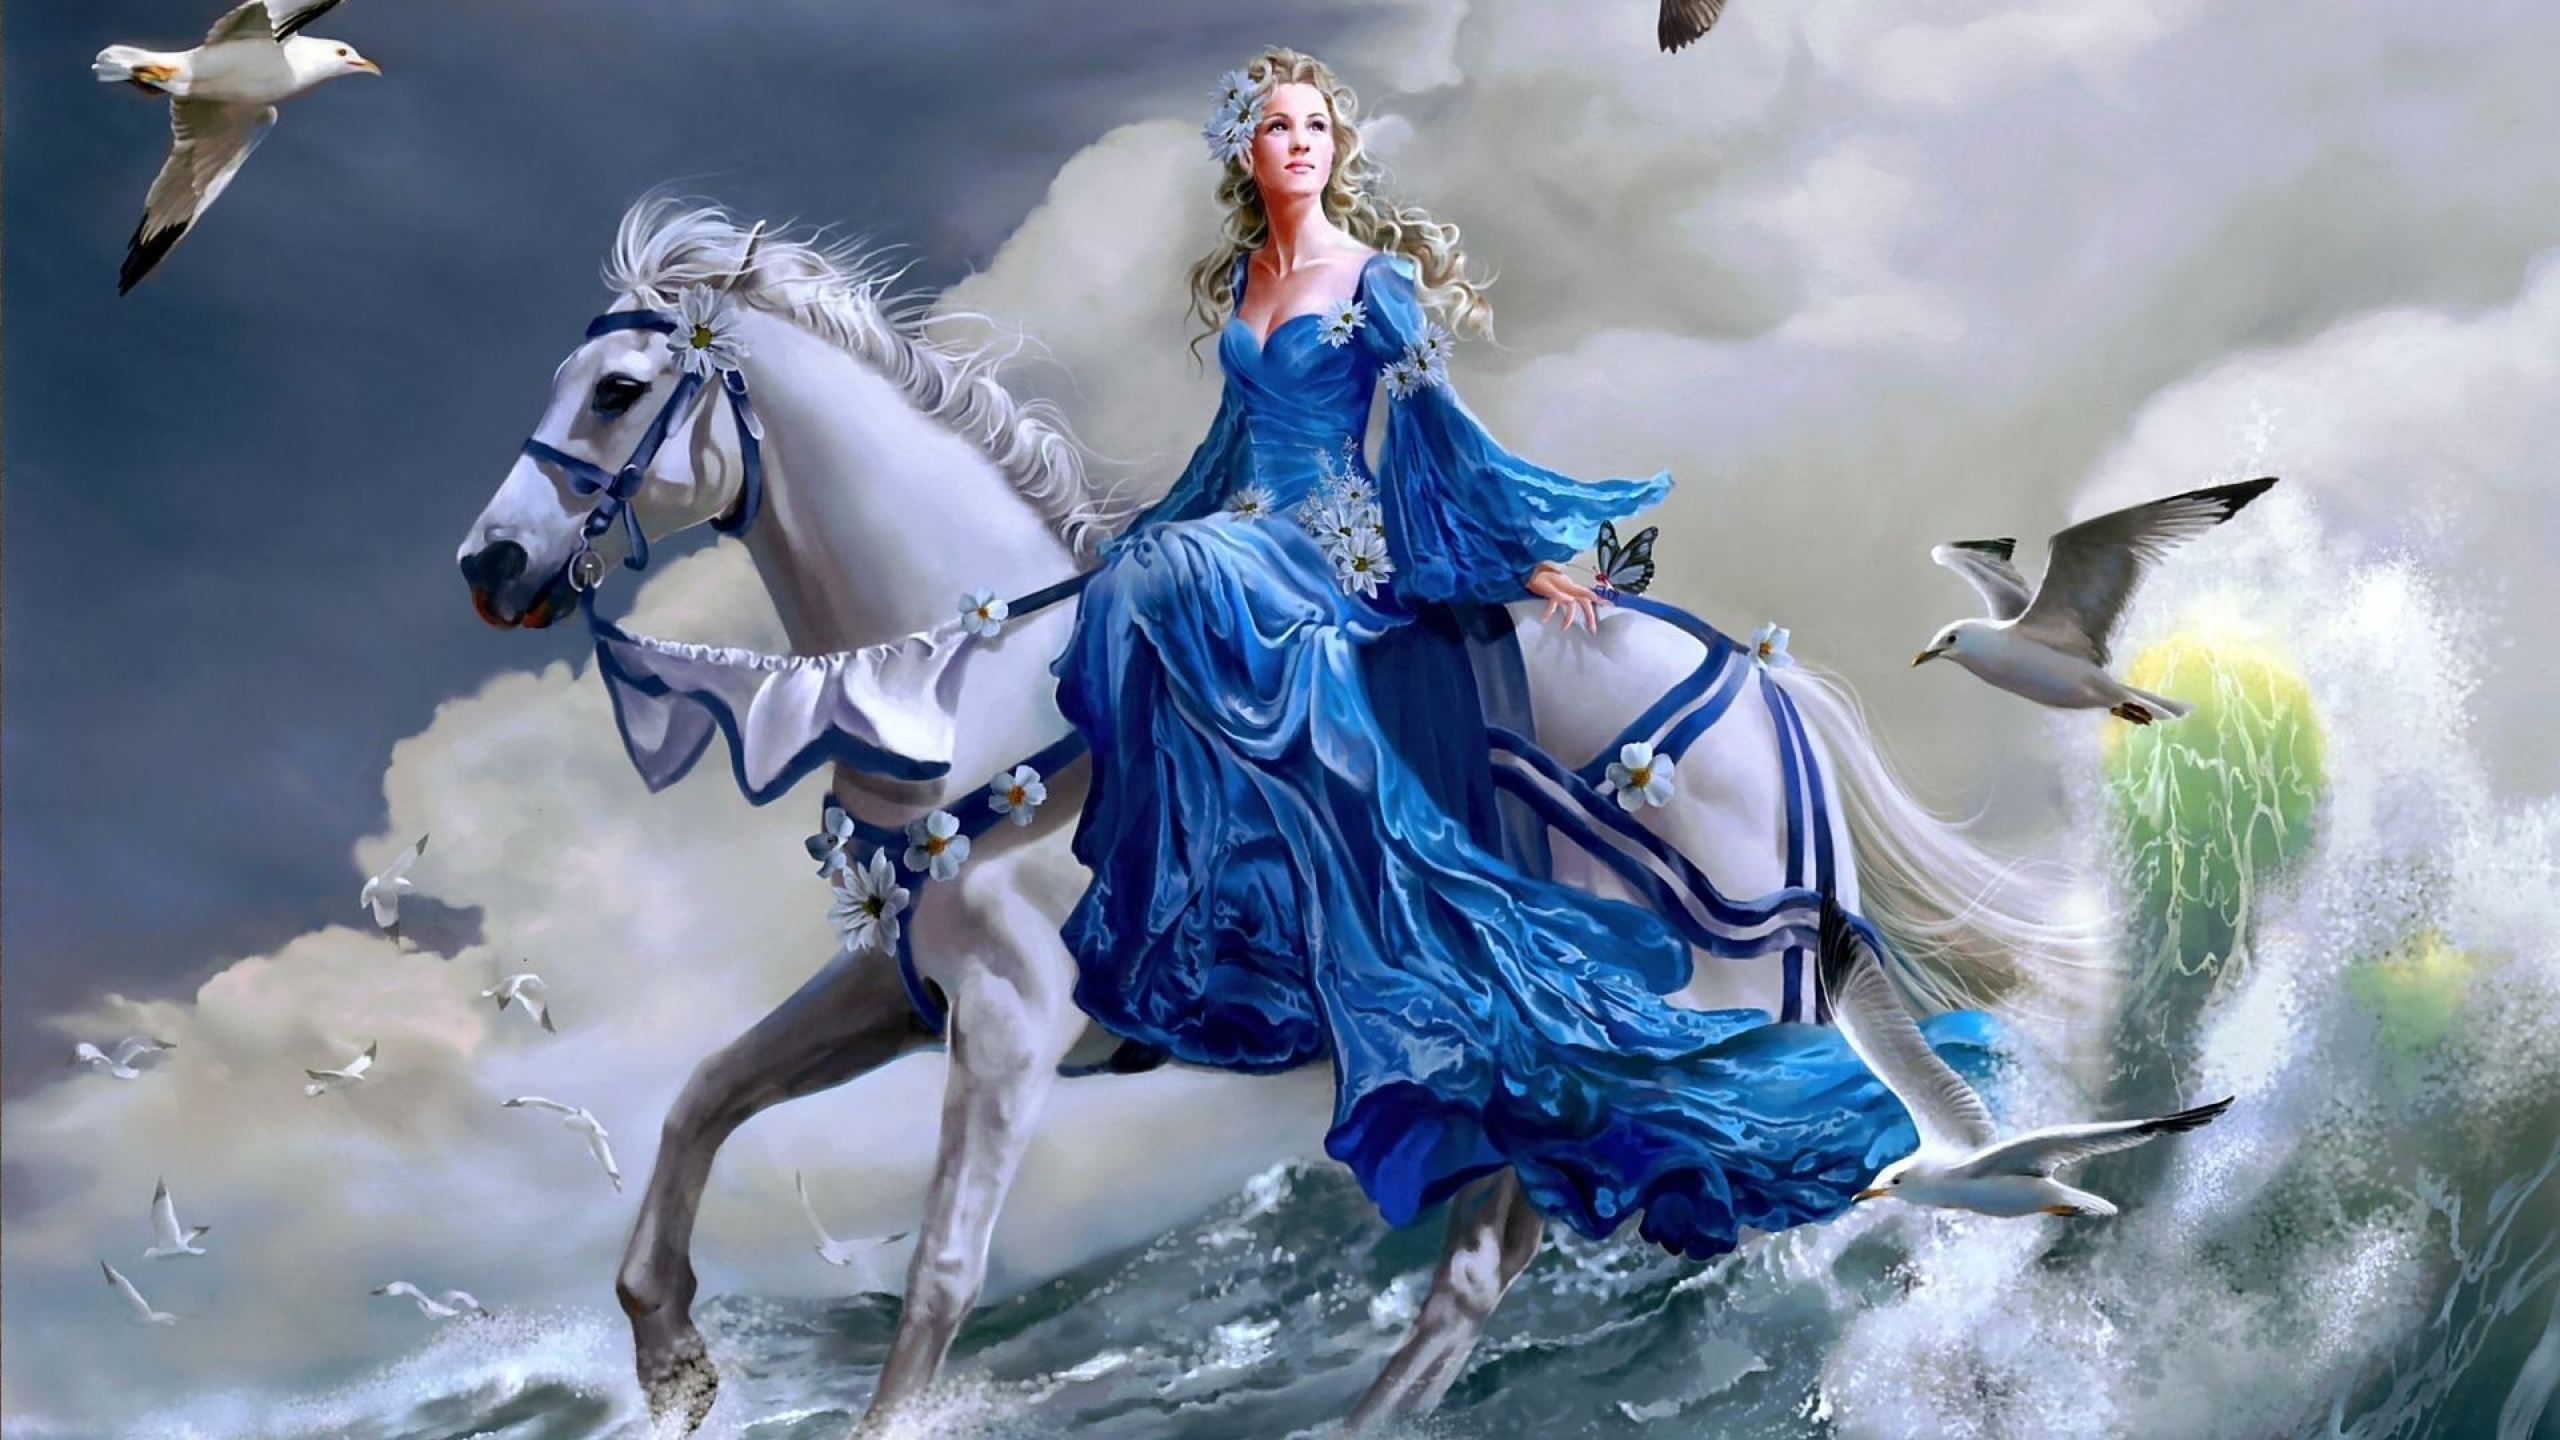 Girl Riding A Horse On Water 2560x1440 Fantasy Wallpaper 28685